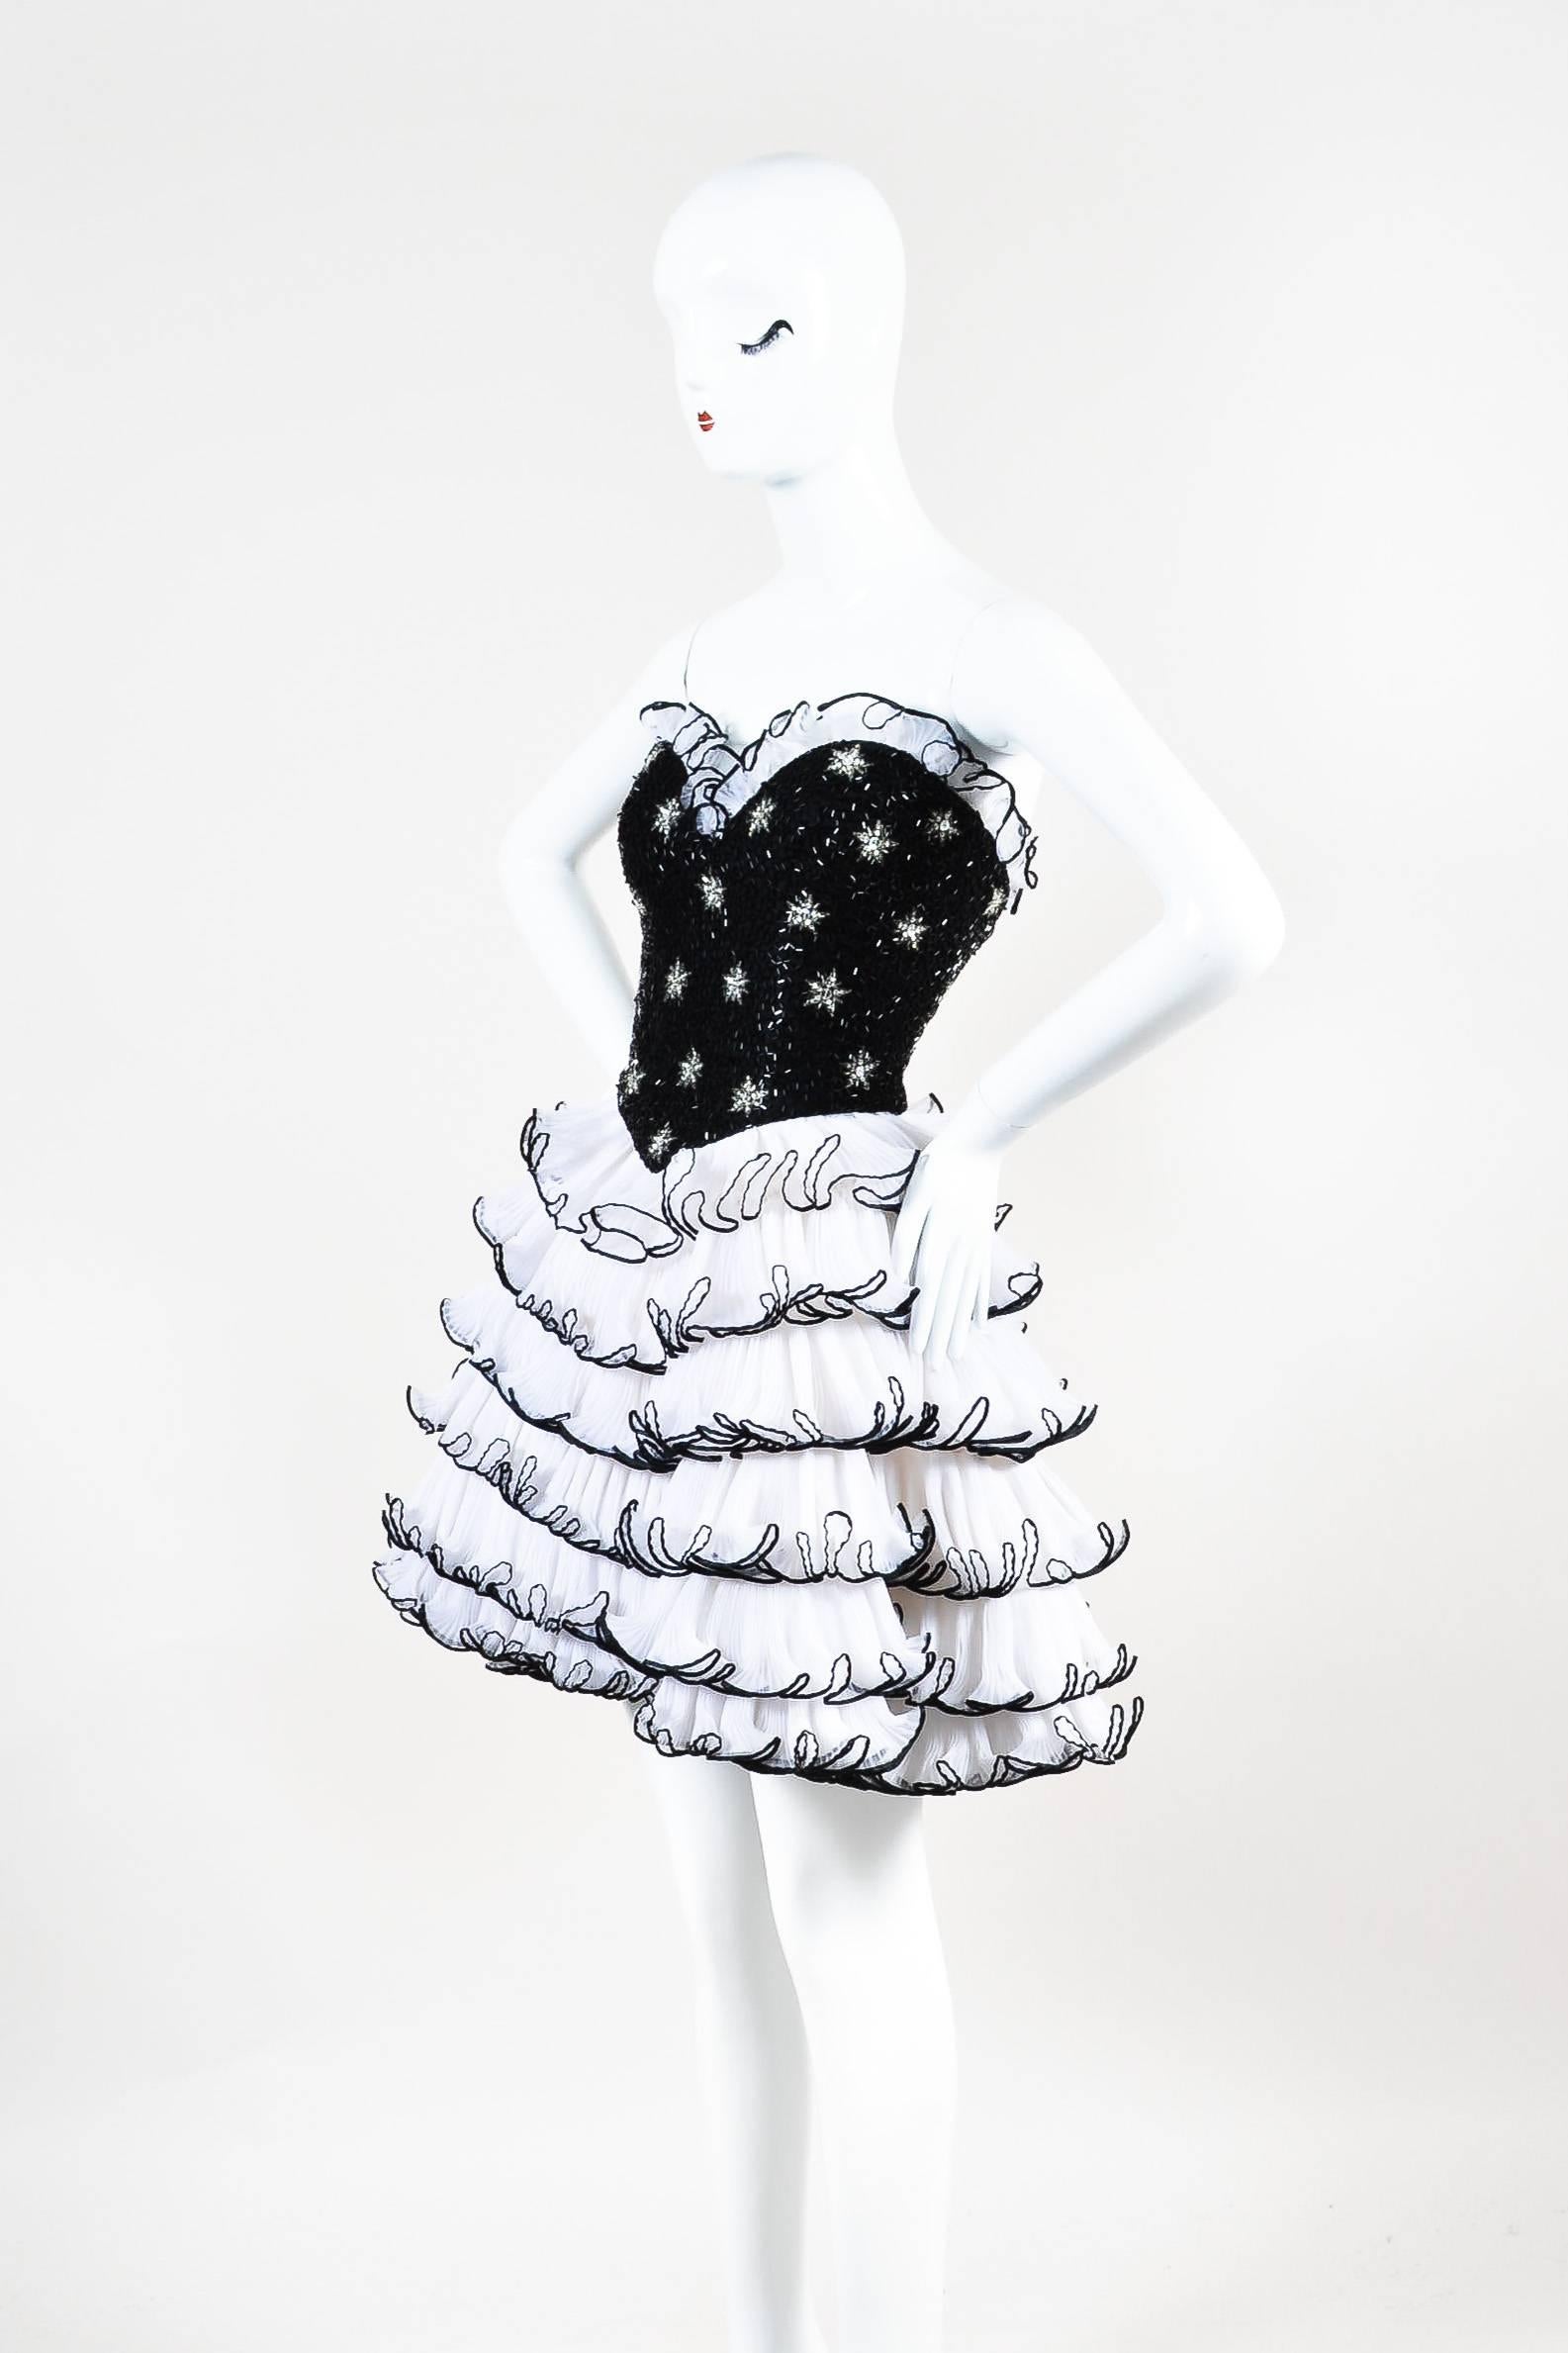 Short strapless cocktail dress. Sweetheart neckline. Black bugle beads and silver sequin embellishment throughout fitted bodice. Layered and tiered accordion-pleated cream ruffles with black trim throughout skirt; same ruffle trim at bust. Light